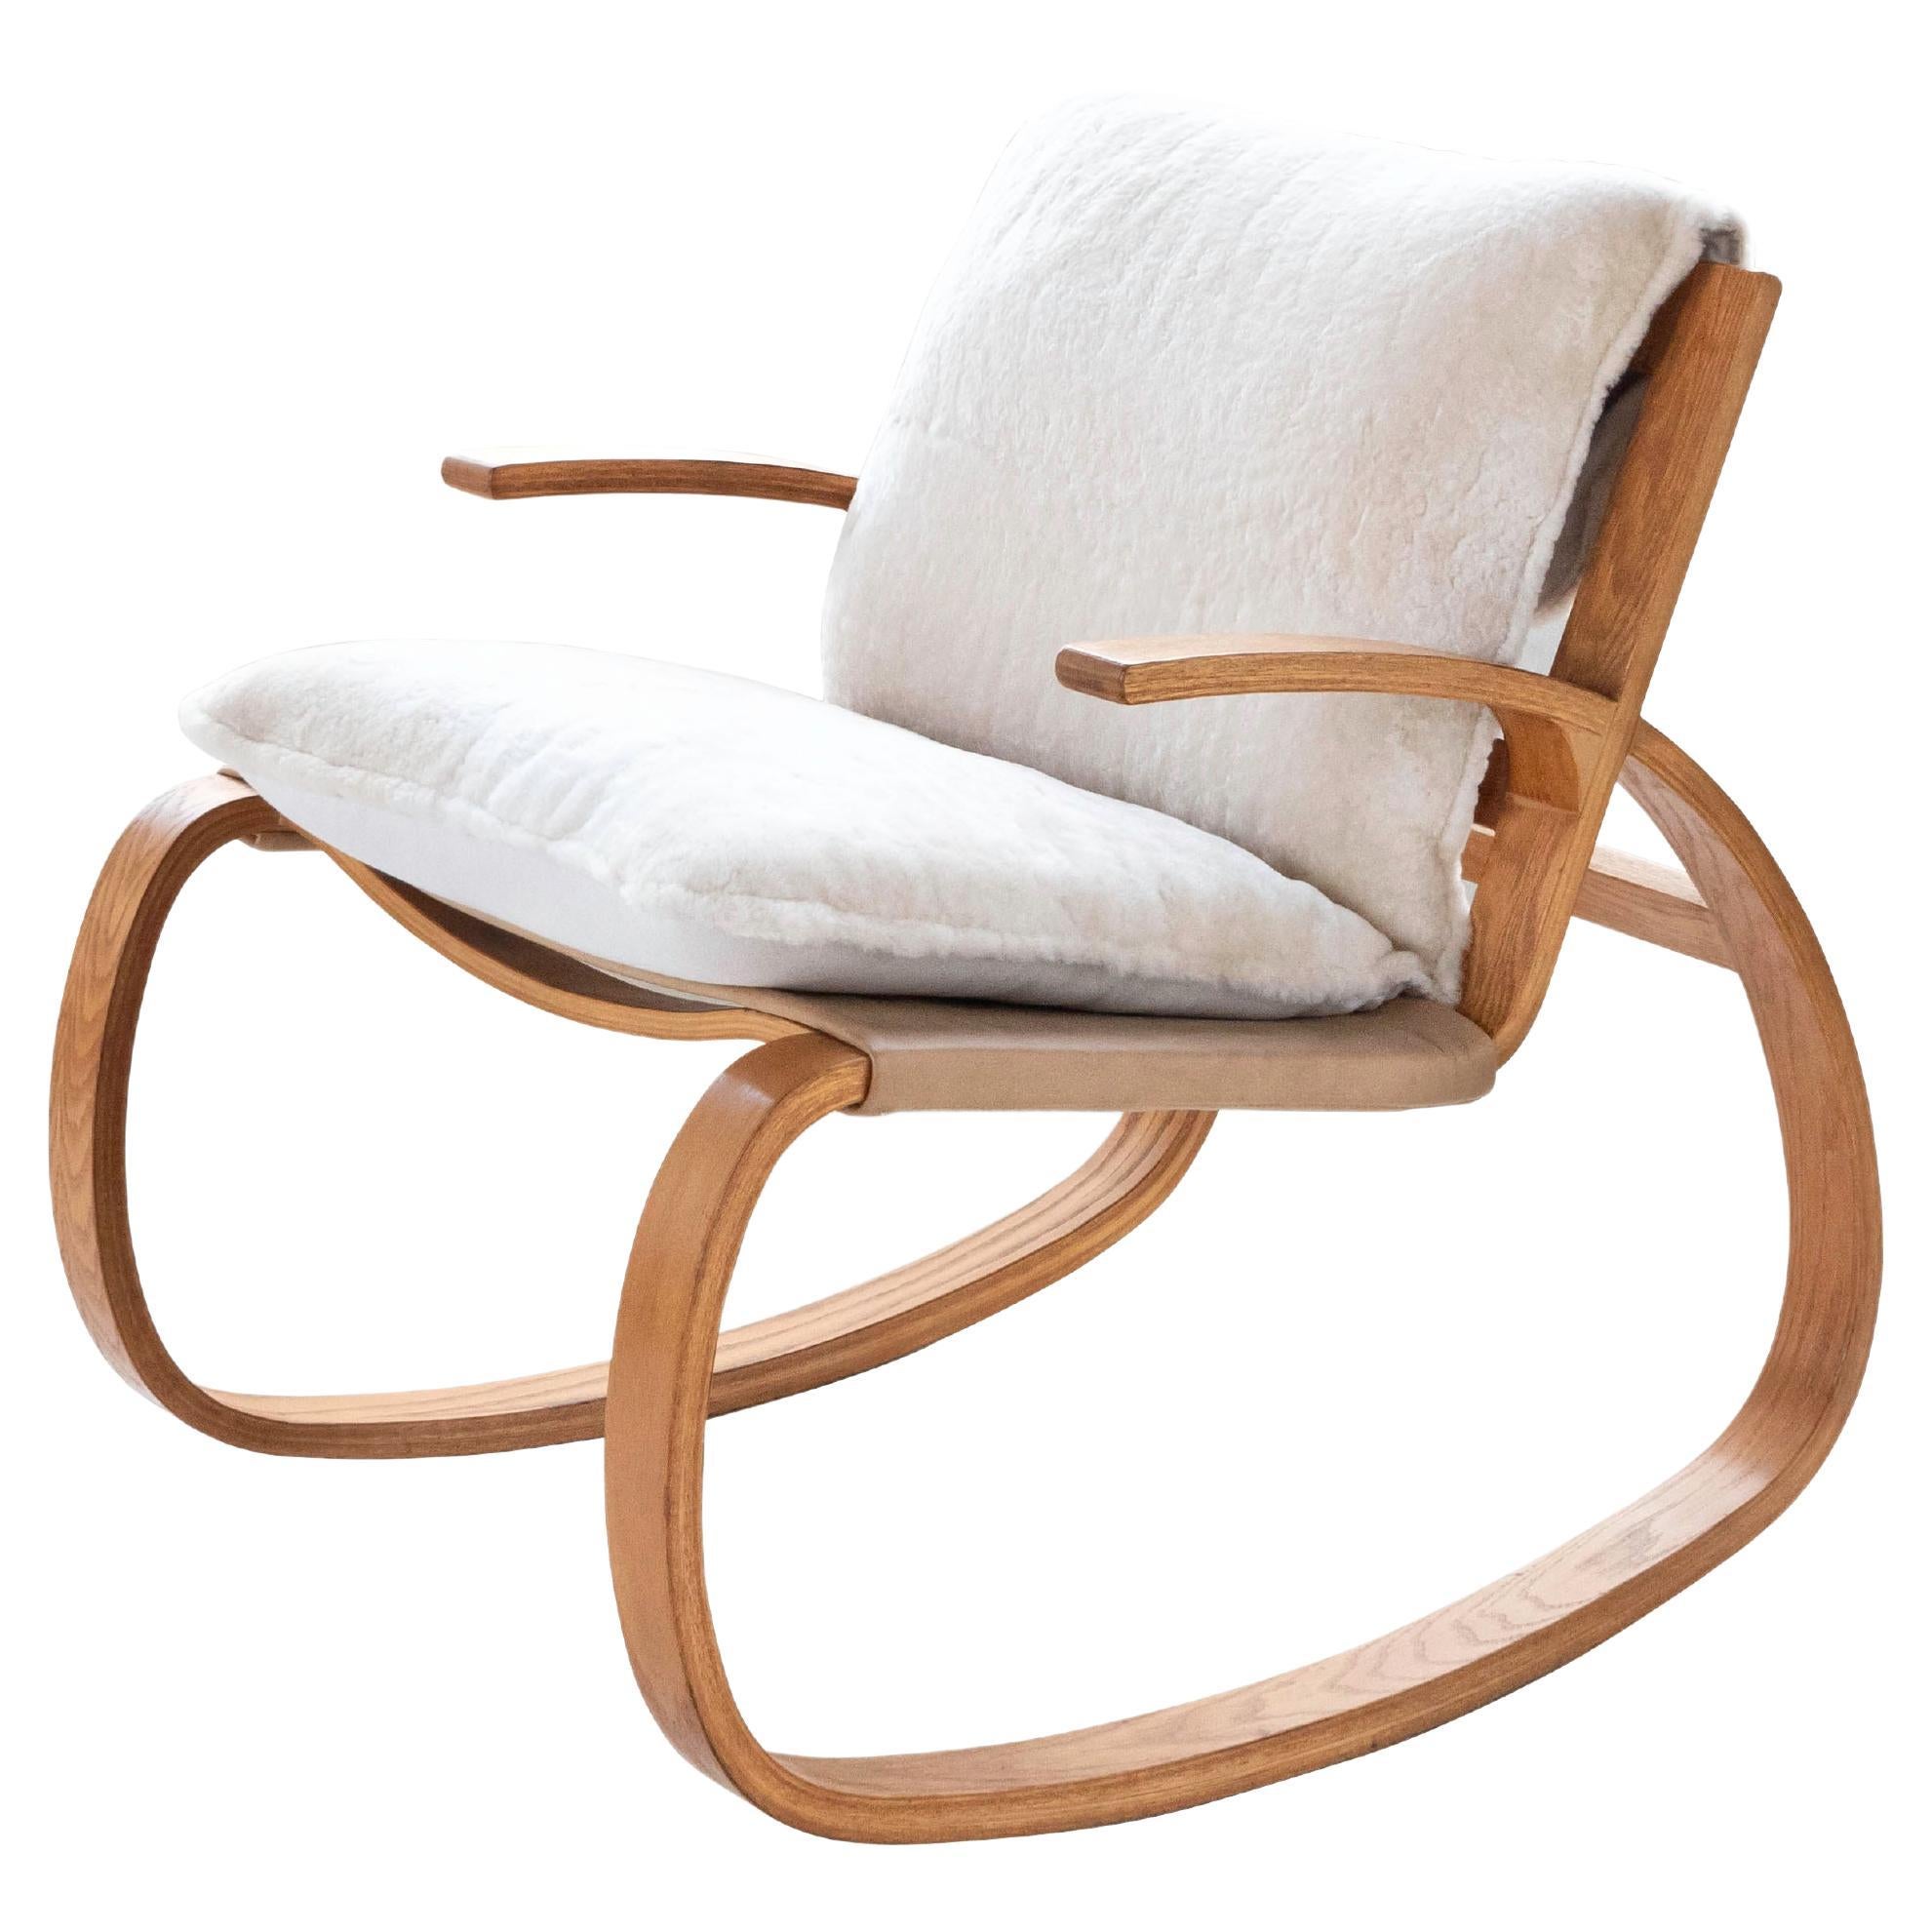 Oak Bentwood Sling Rocking Chair in Shearling by Plycraft, Circa 1970's